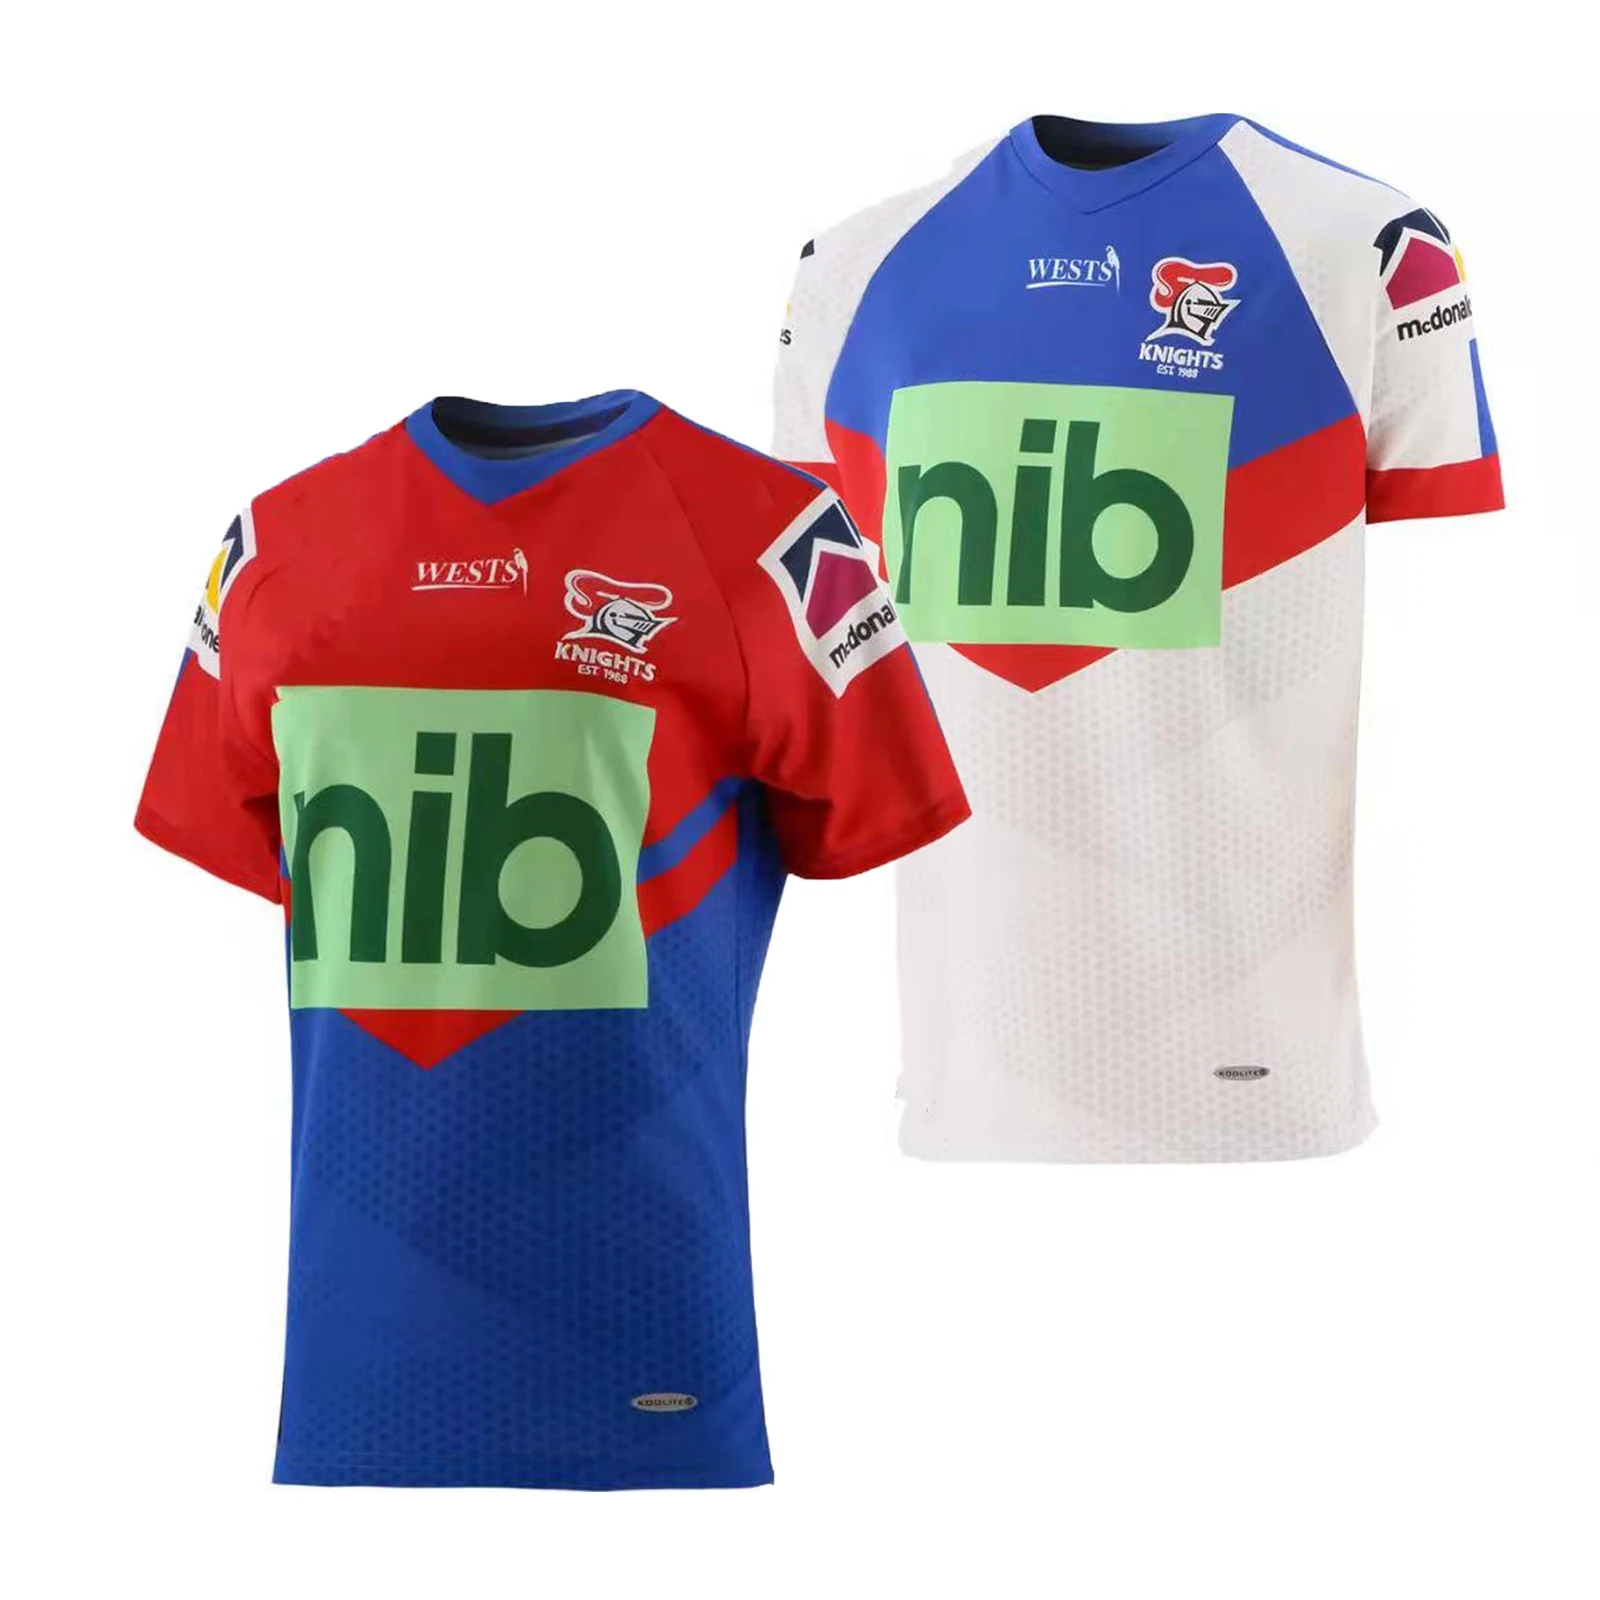 

2022 Newcastle Knights Men's Replica Home/Away Jersey Rugby Jersey S-5XL